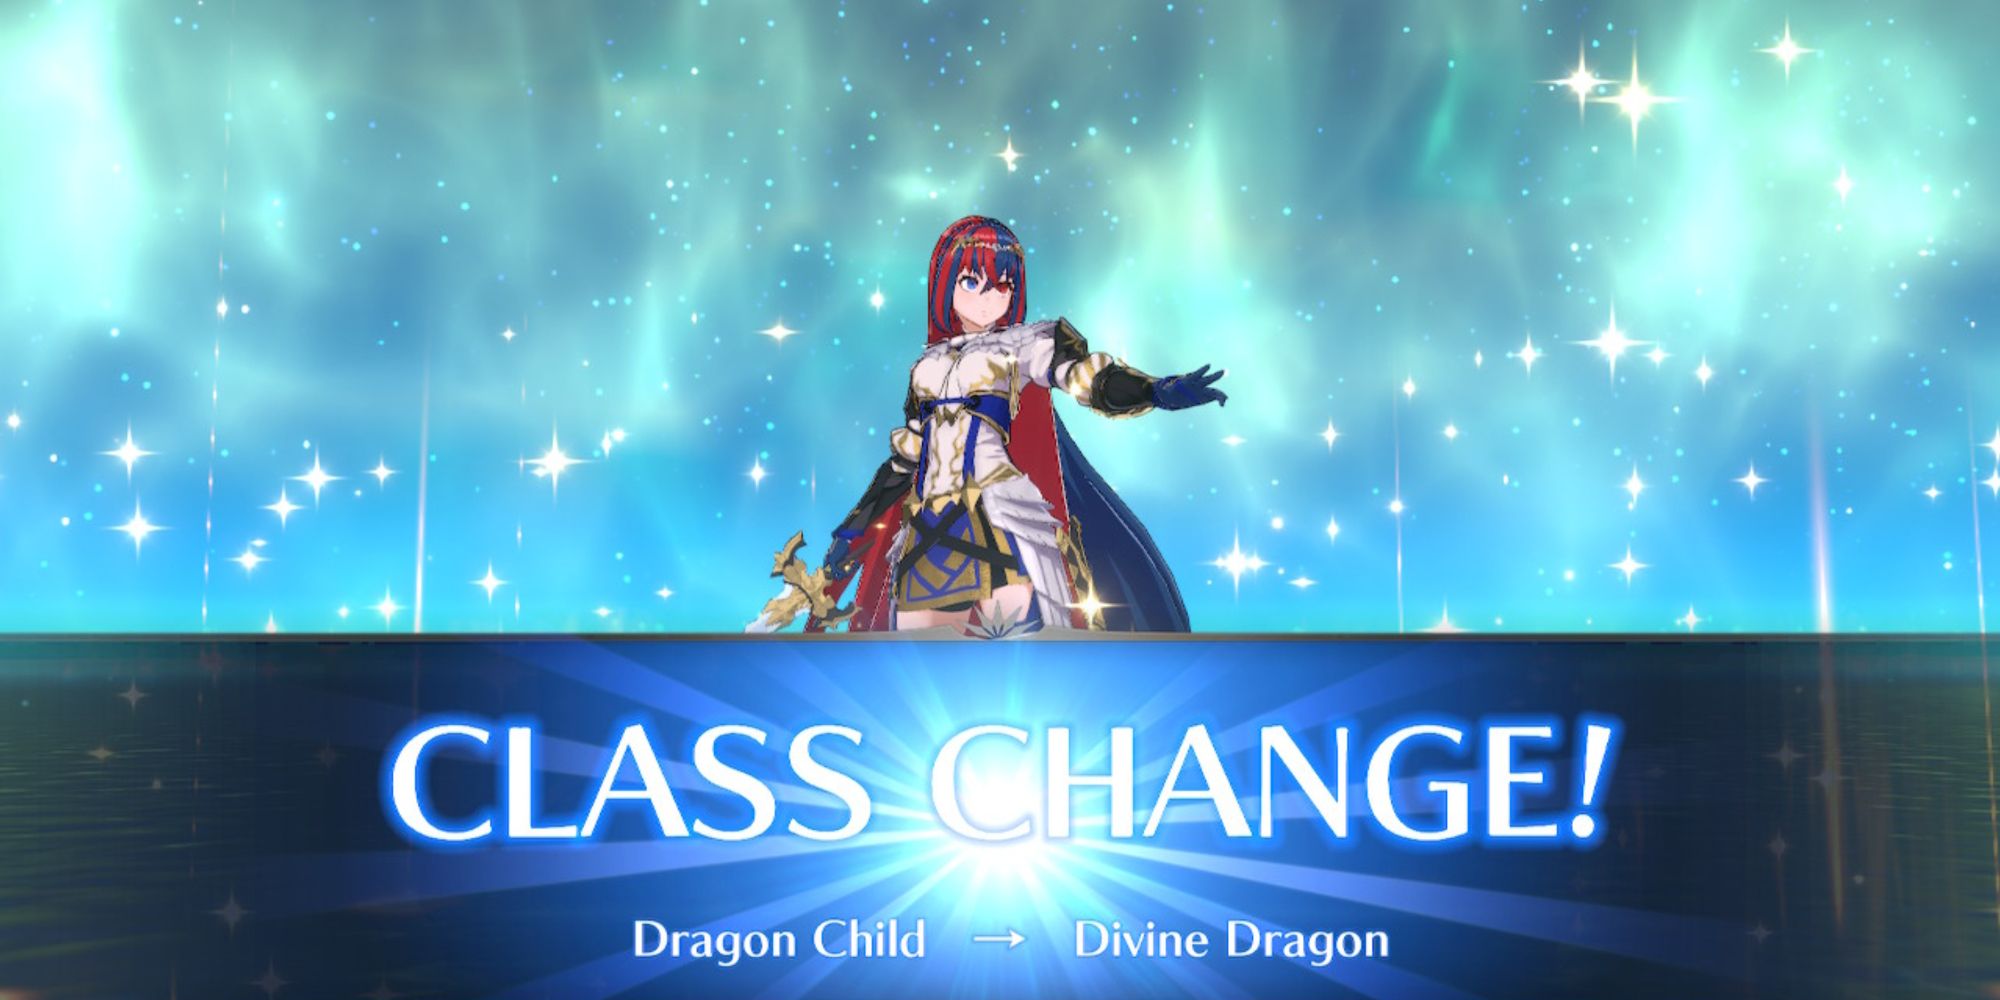 Alear changed from Dragon Child to Divine Dragon class